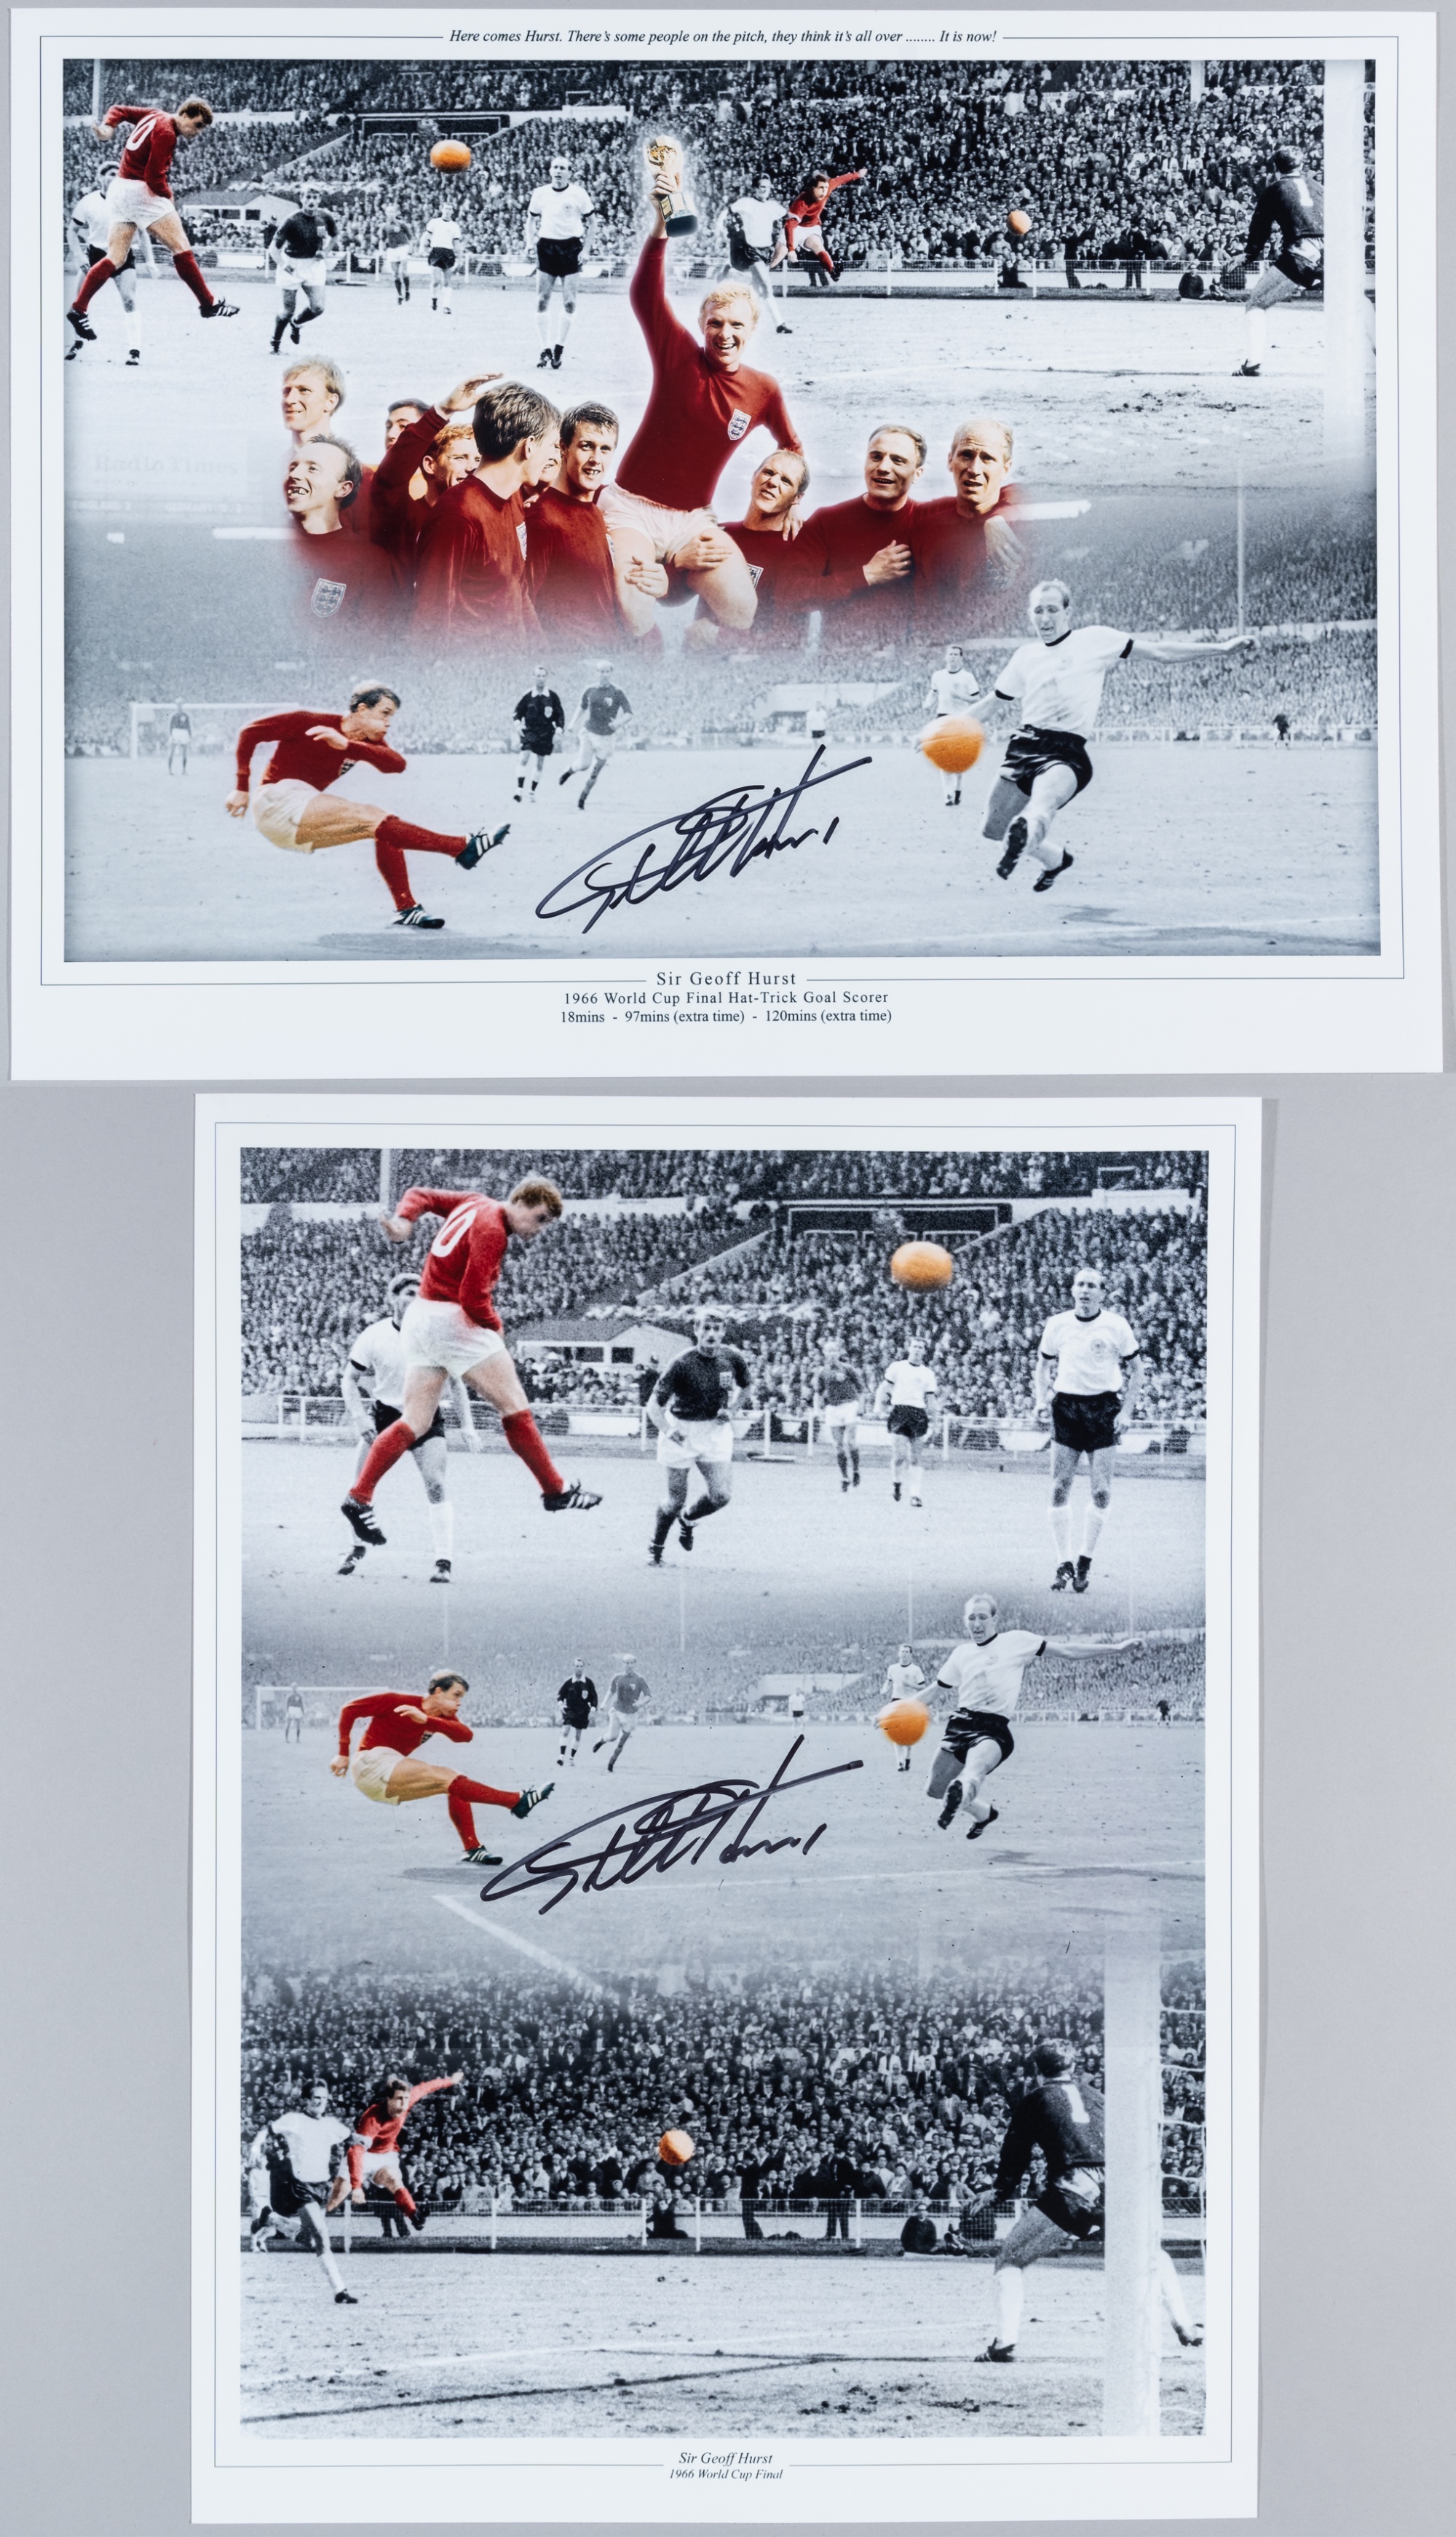 Two wonderful montage pictures of World Cup 1966